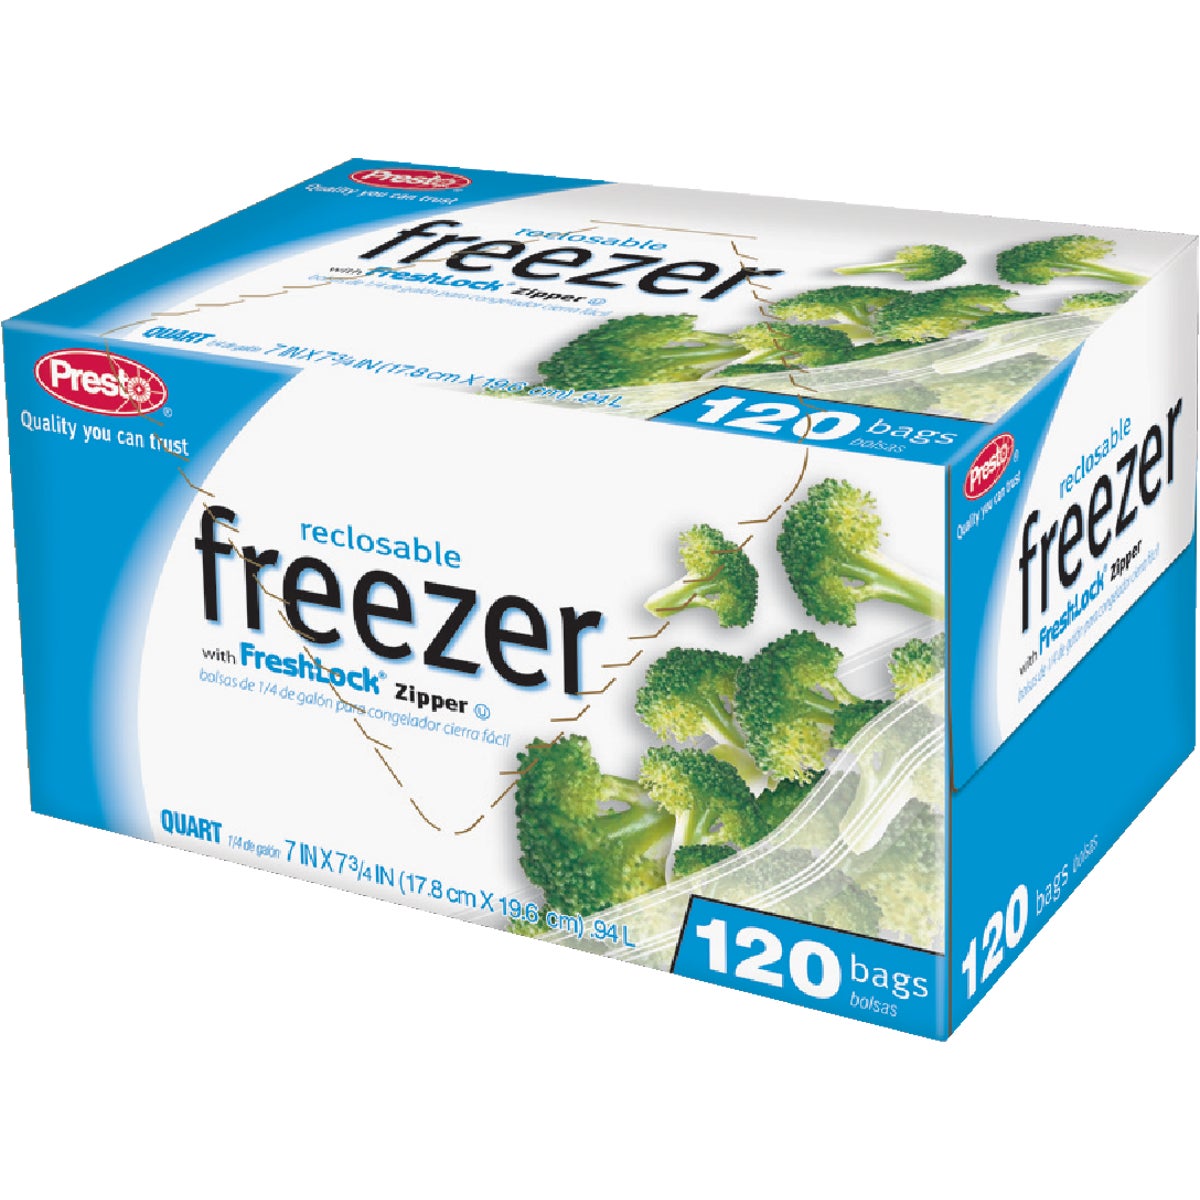 Item 600942, Reclosable freezer bags with Freshlock zipper protect food from freezer 